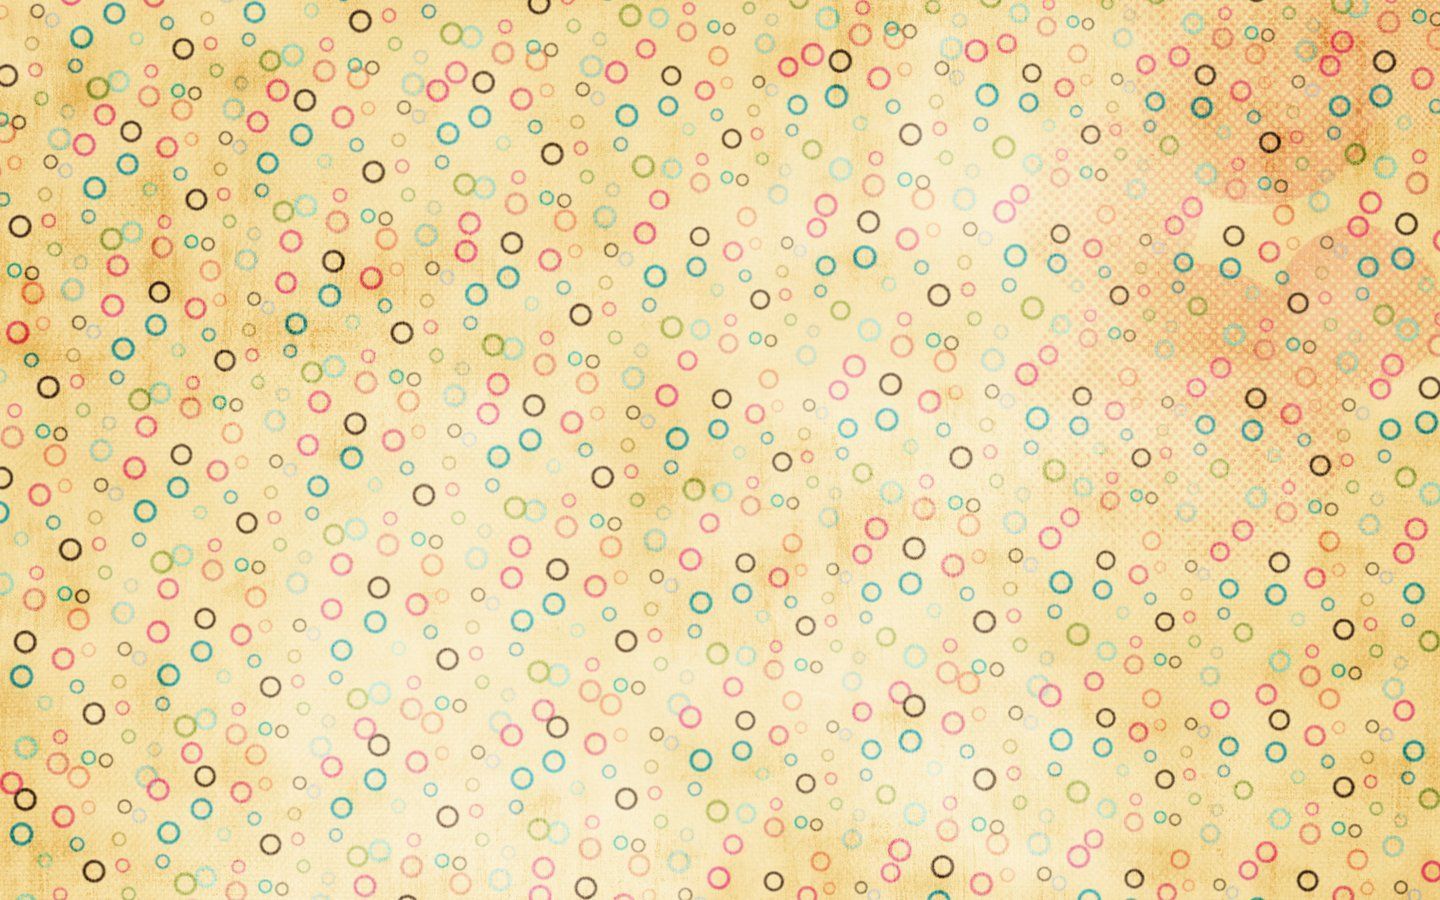 Yellow dots background wallpaper 19637 - Background patterns - Others